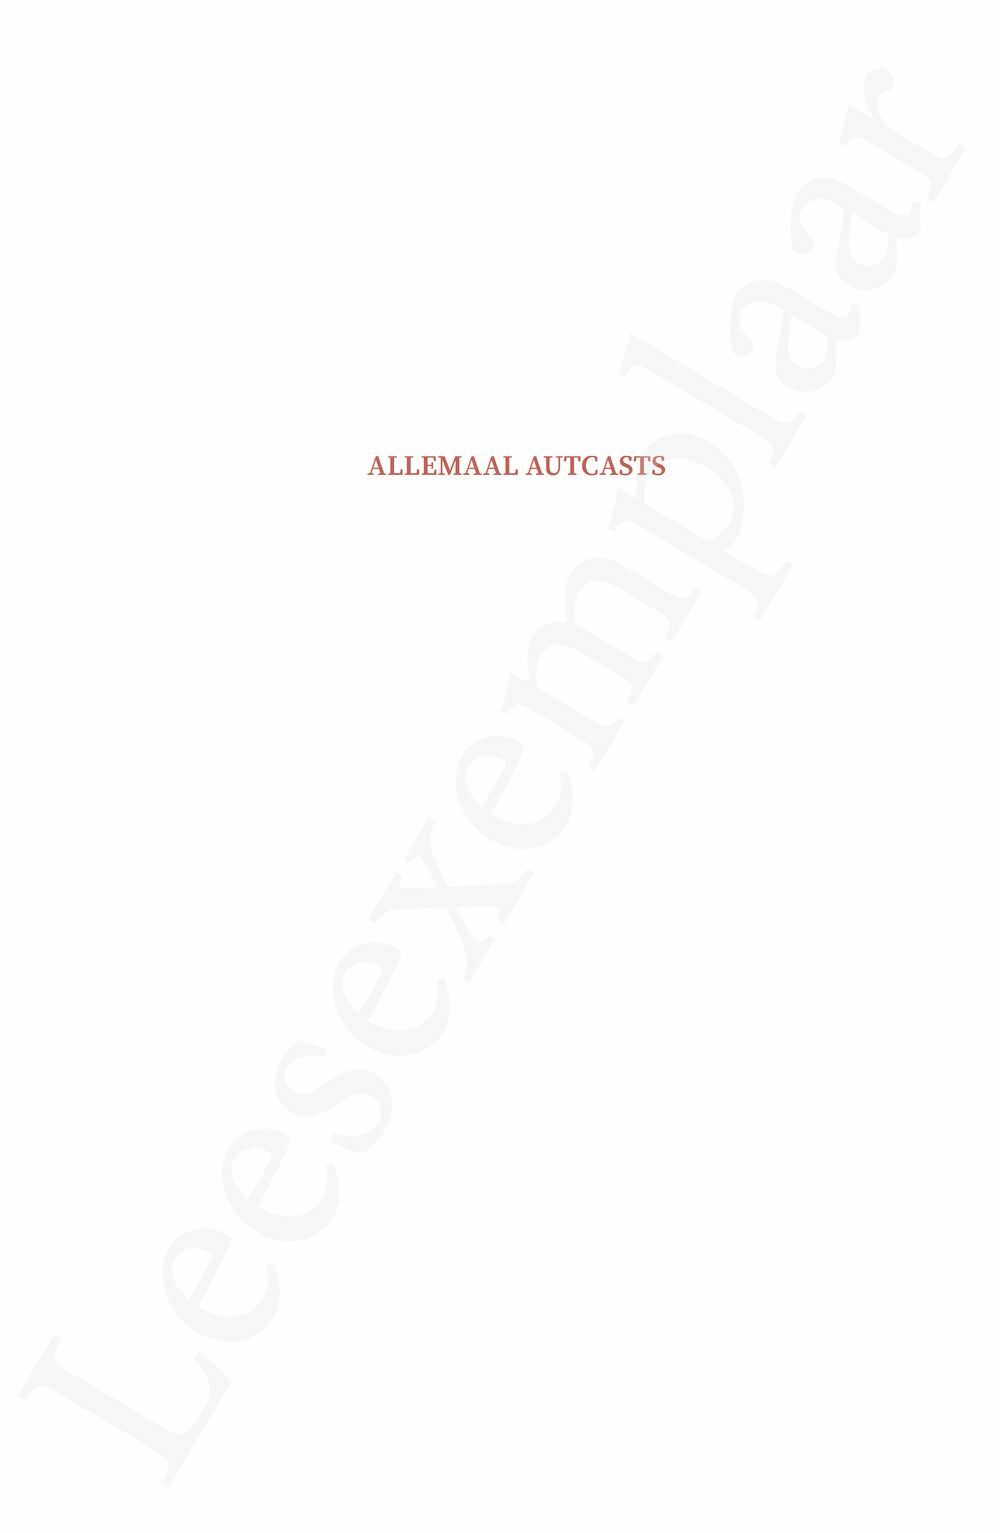 Preview: Allemaal autcasts